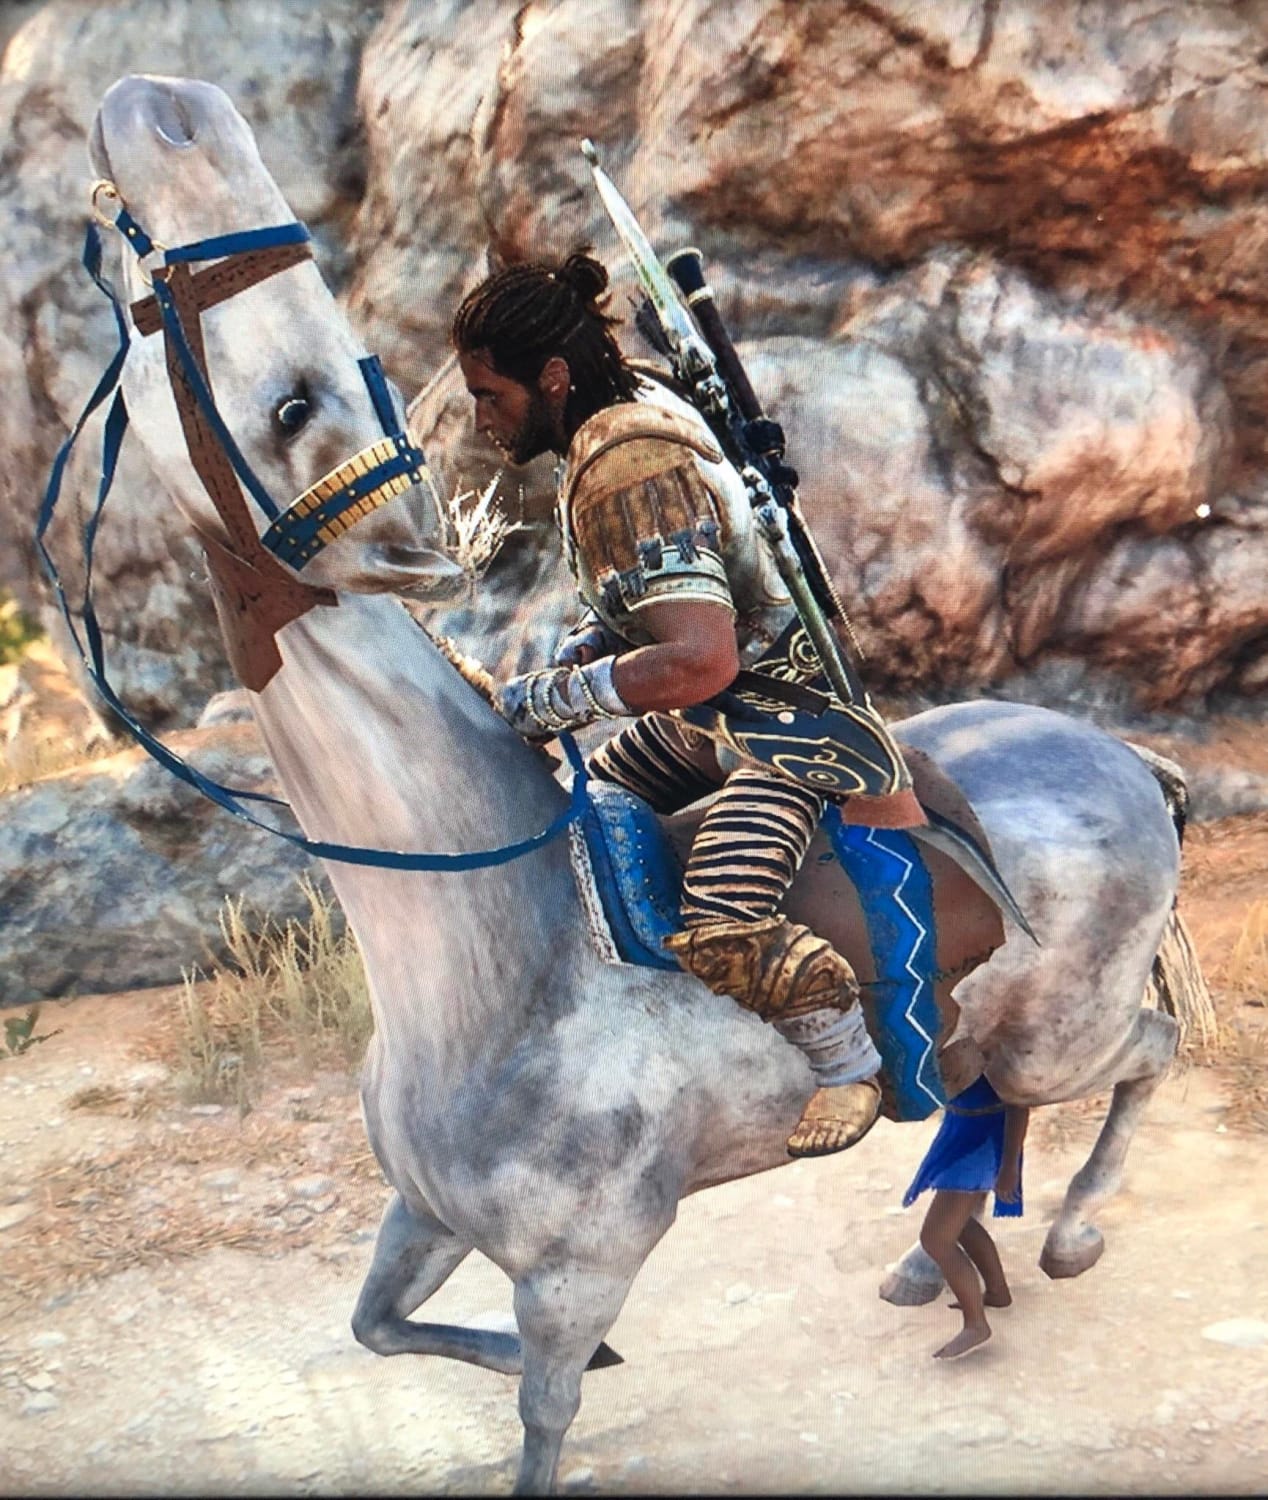 [AC odyssey] My horse has some issues..